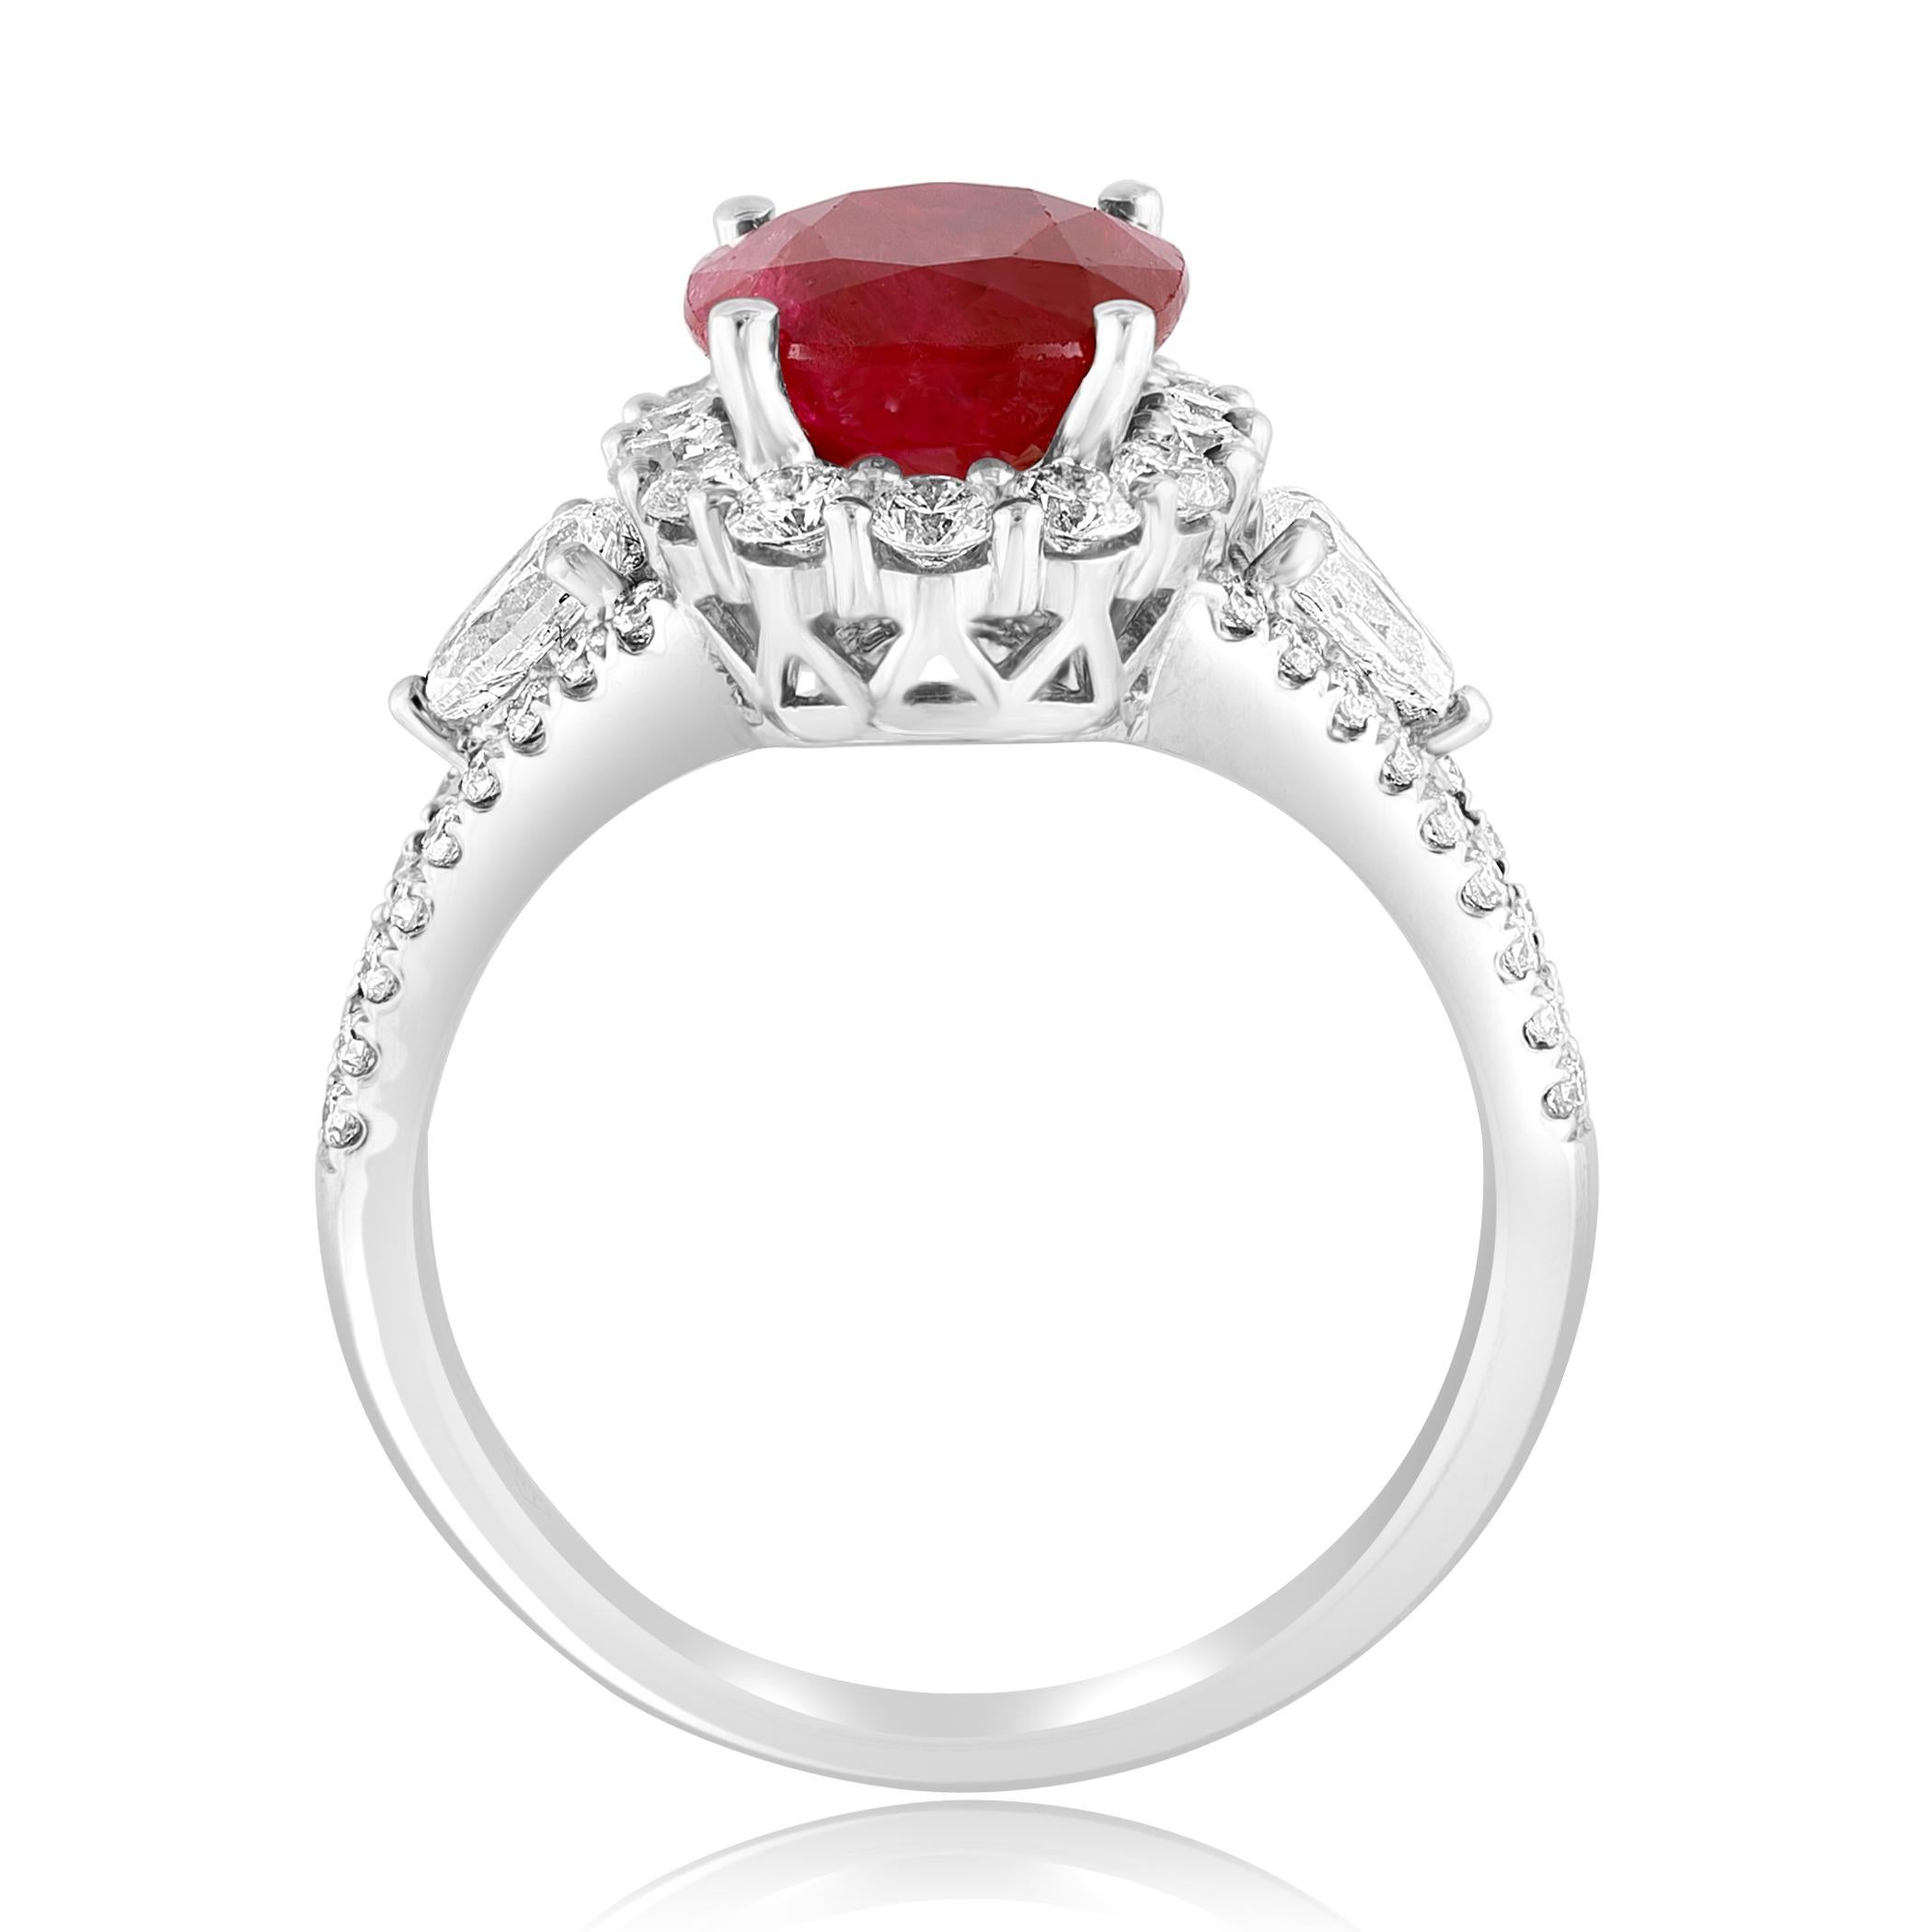 Modern 3.58 Carat Oval Cut Ruby and Diamond Halo Ring in 18K White Gold For Sale